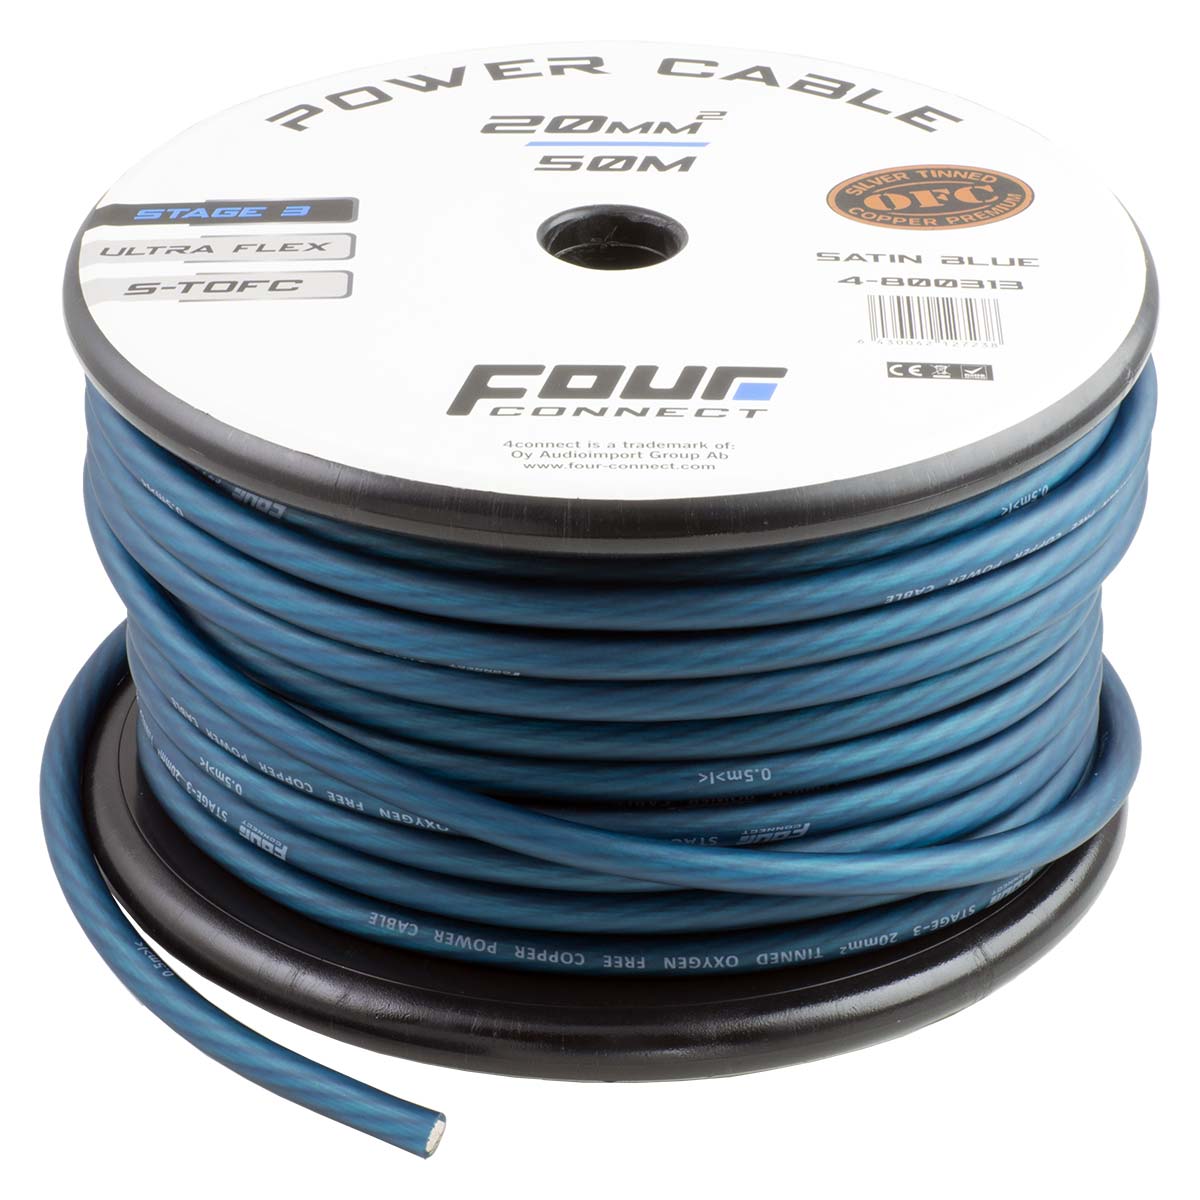 FOUR Connect 4-800313 STAGE3 20mm2 Satin Blue S-TOFC power cable, 50m